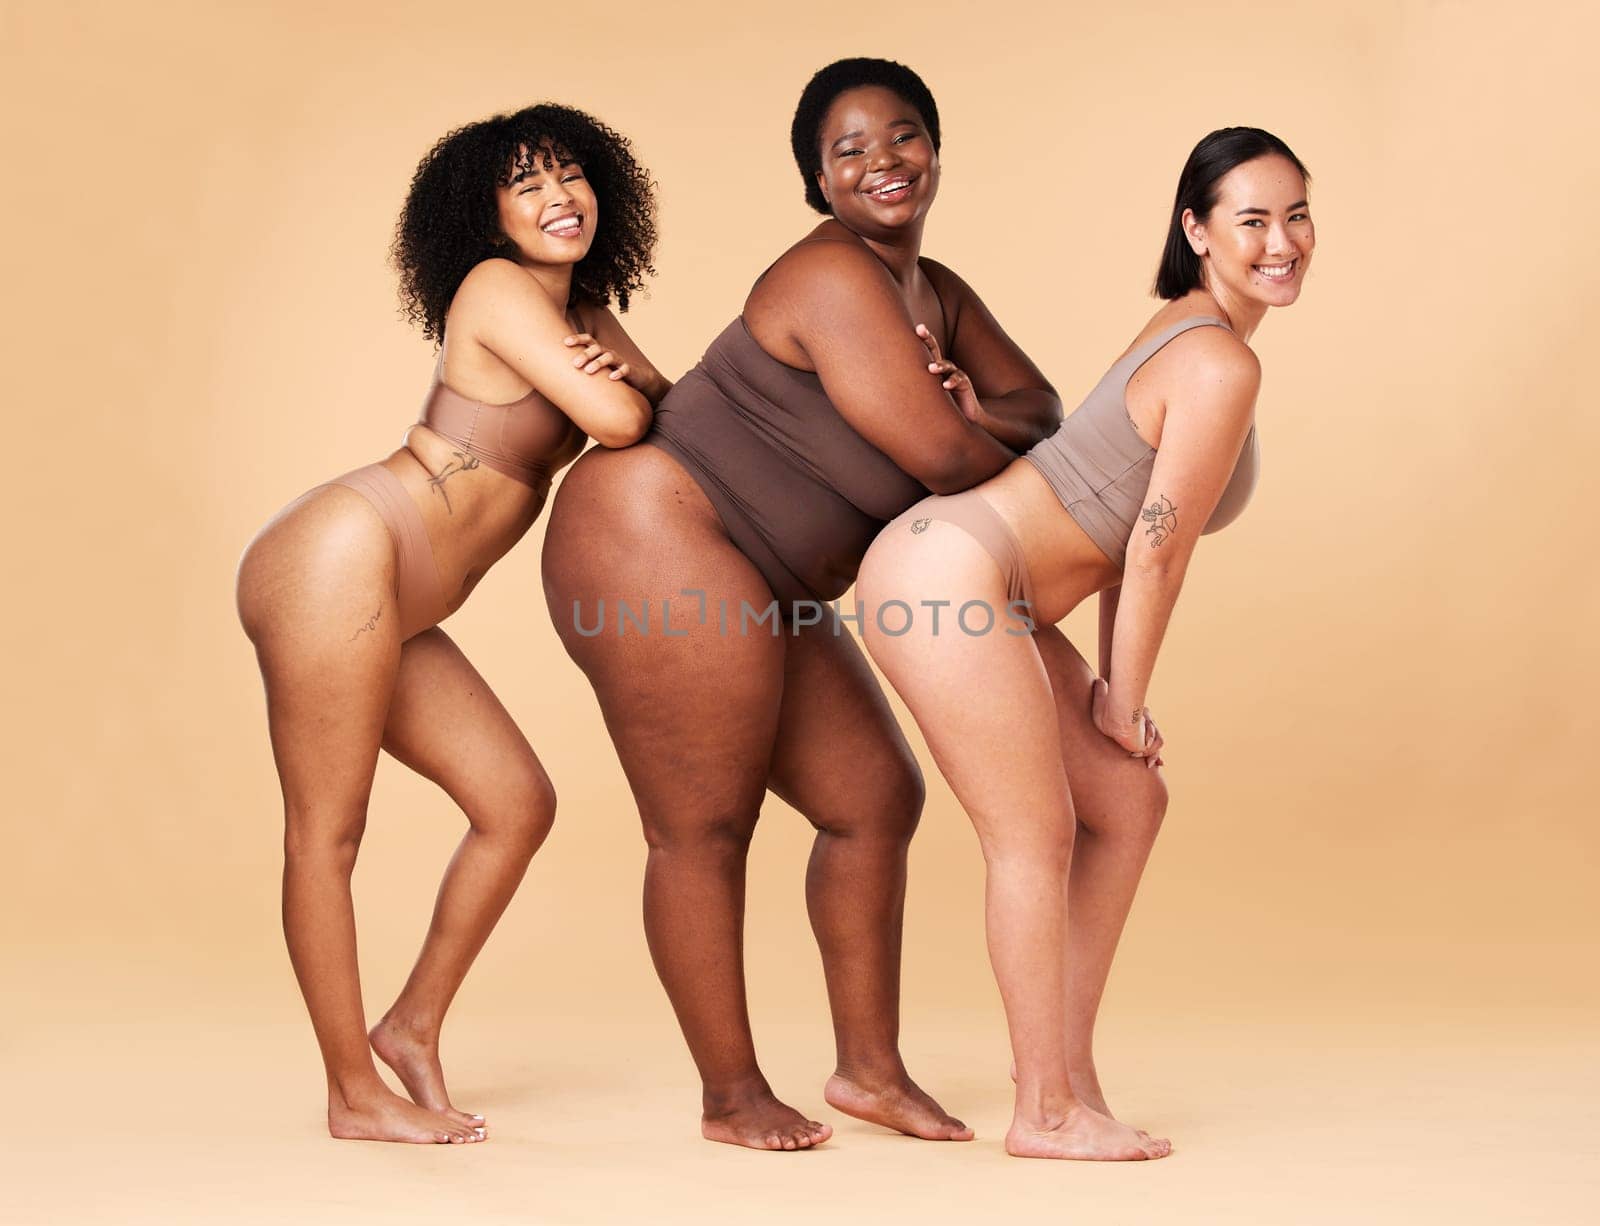 Diversity women, body size and portrait of group together for inclusion, beauty and power. Underwear model friends happy on beige background with cellulite legs, skin pride and self love motivation by YuriArcurs